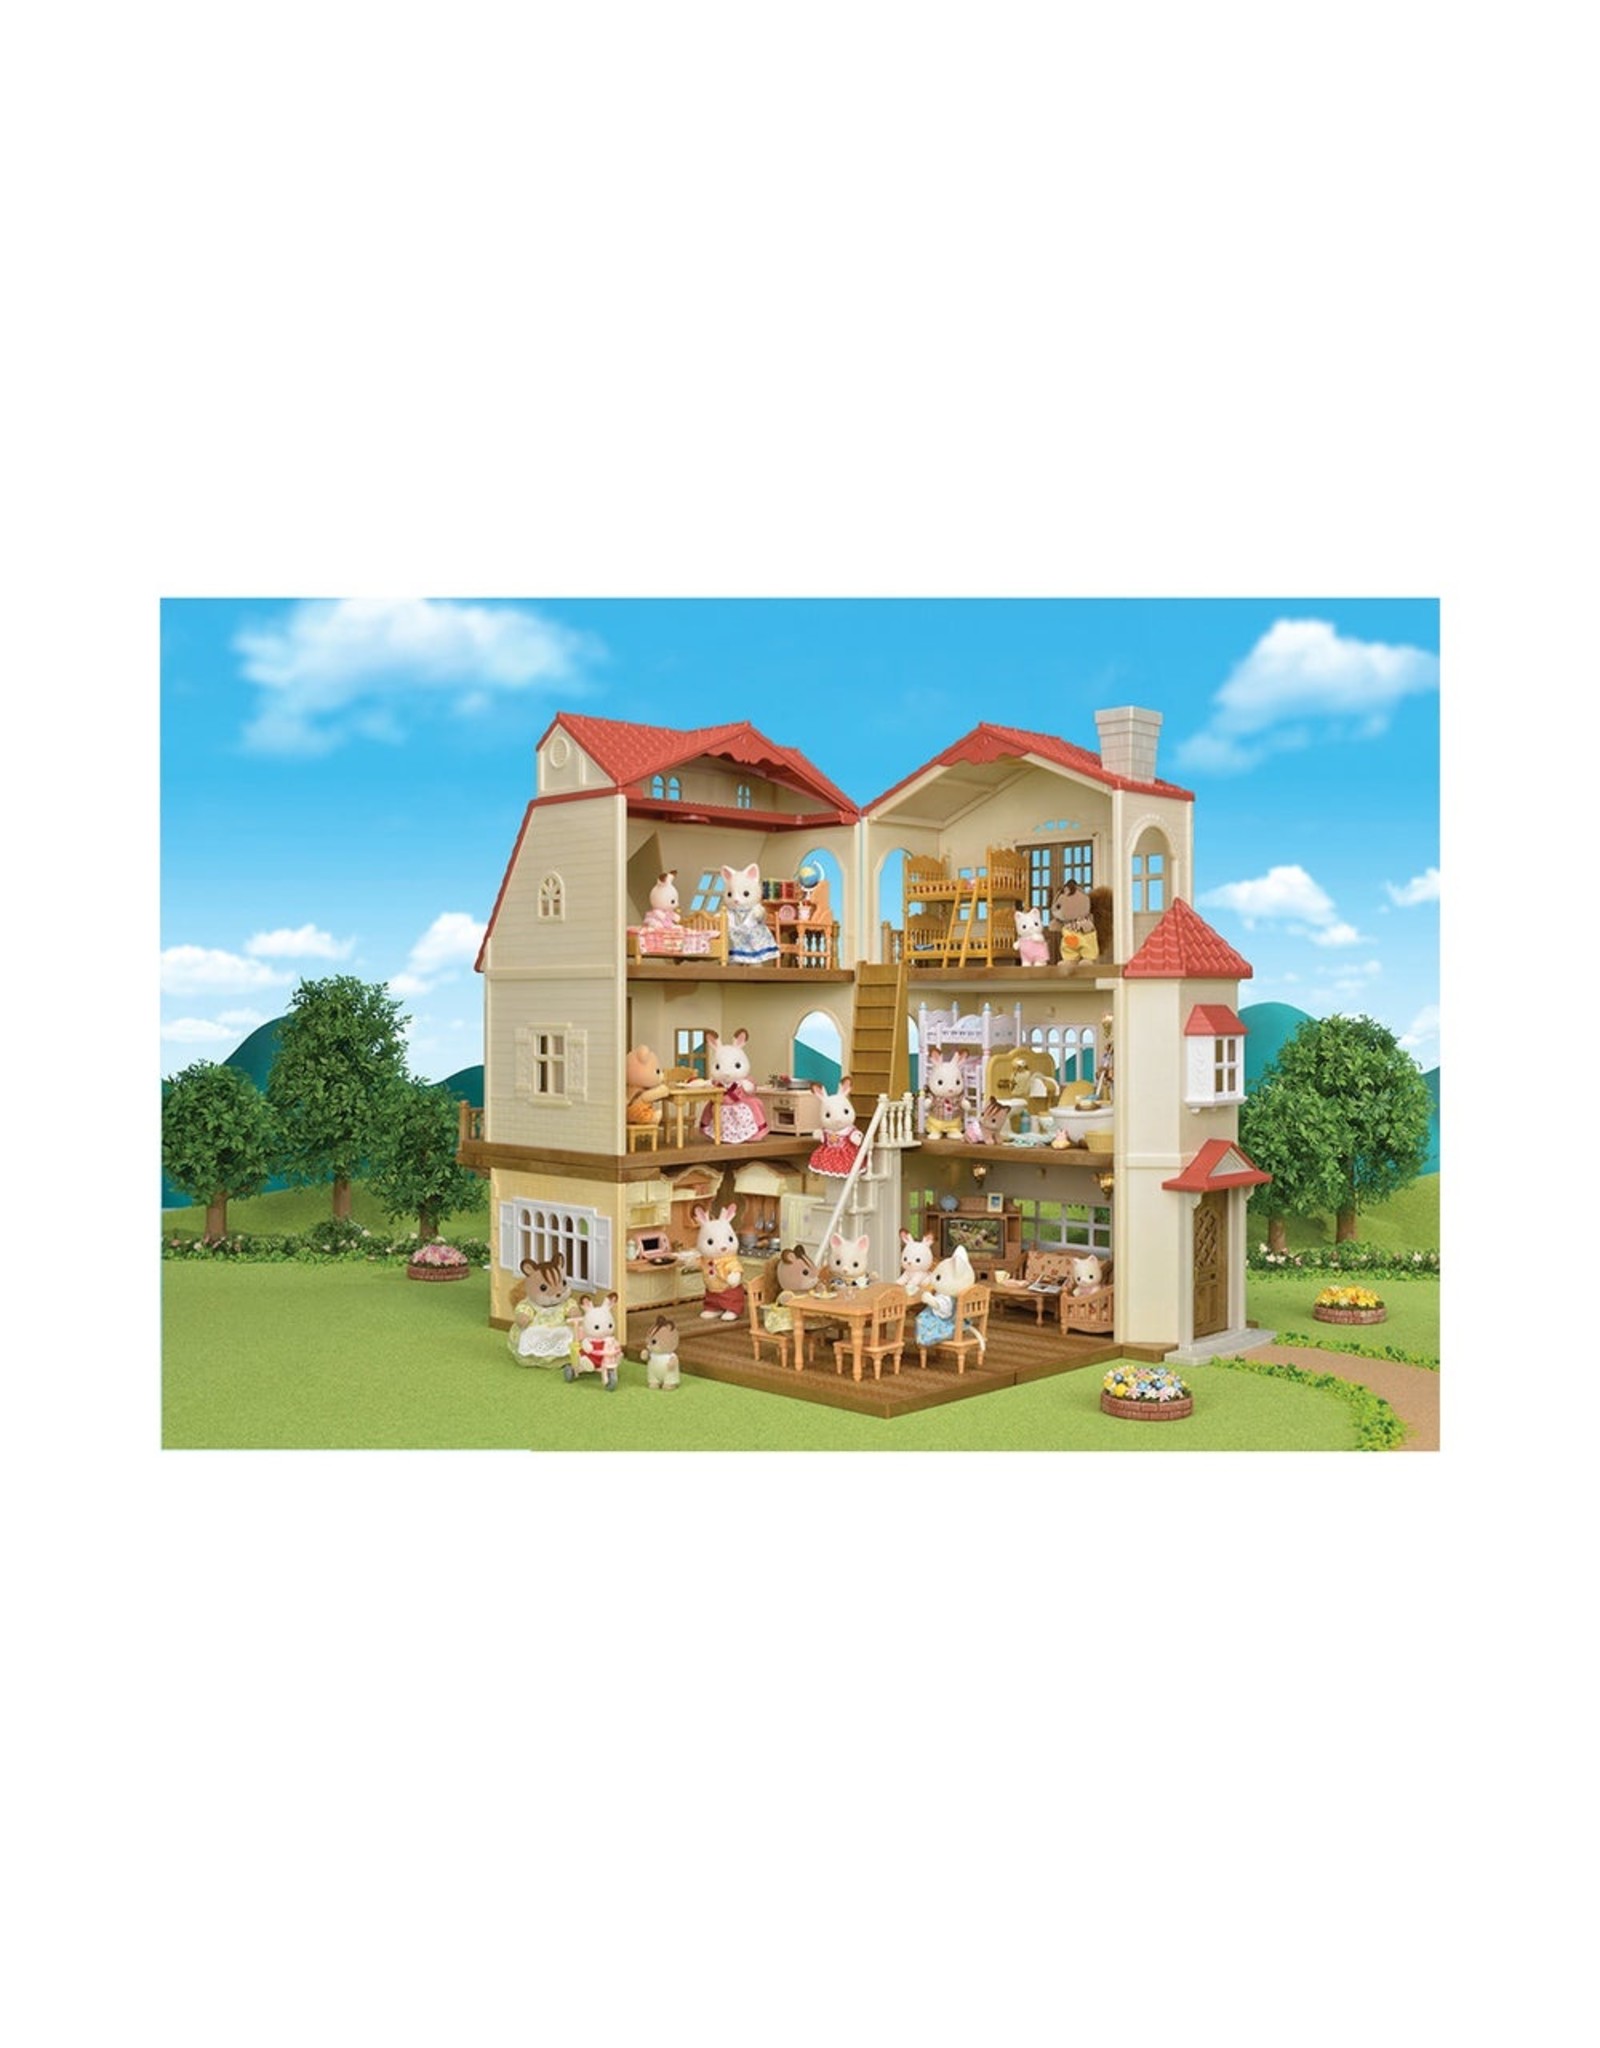 Calico Critters Calico Critters Red Roof Grand Mansion Gift Set